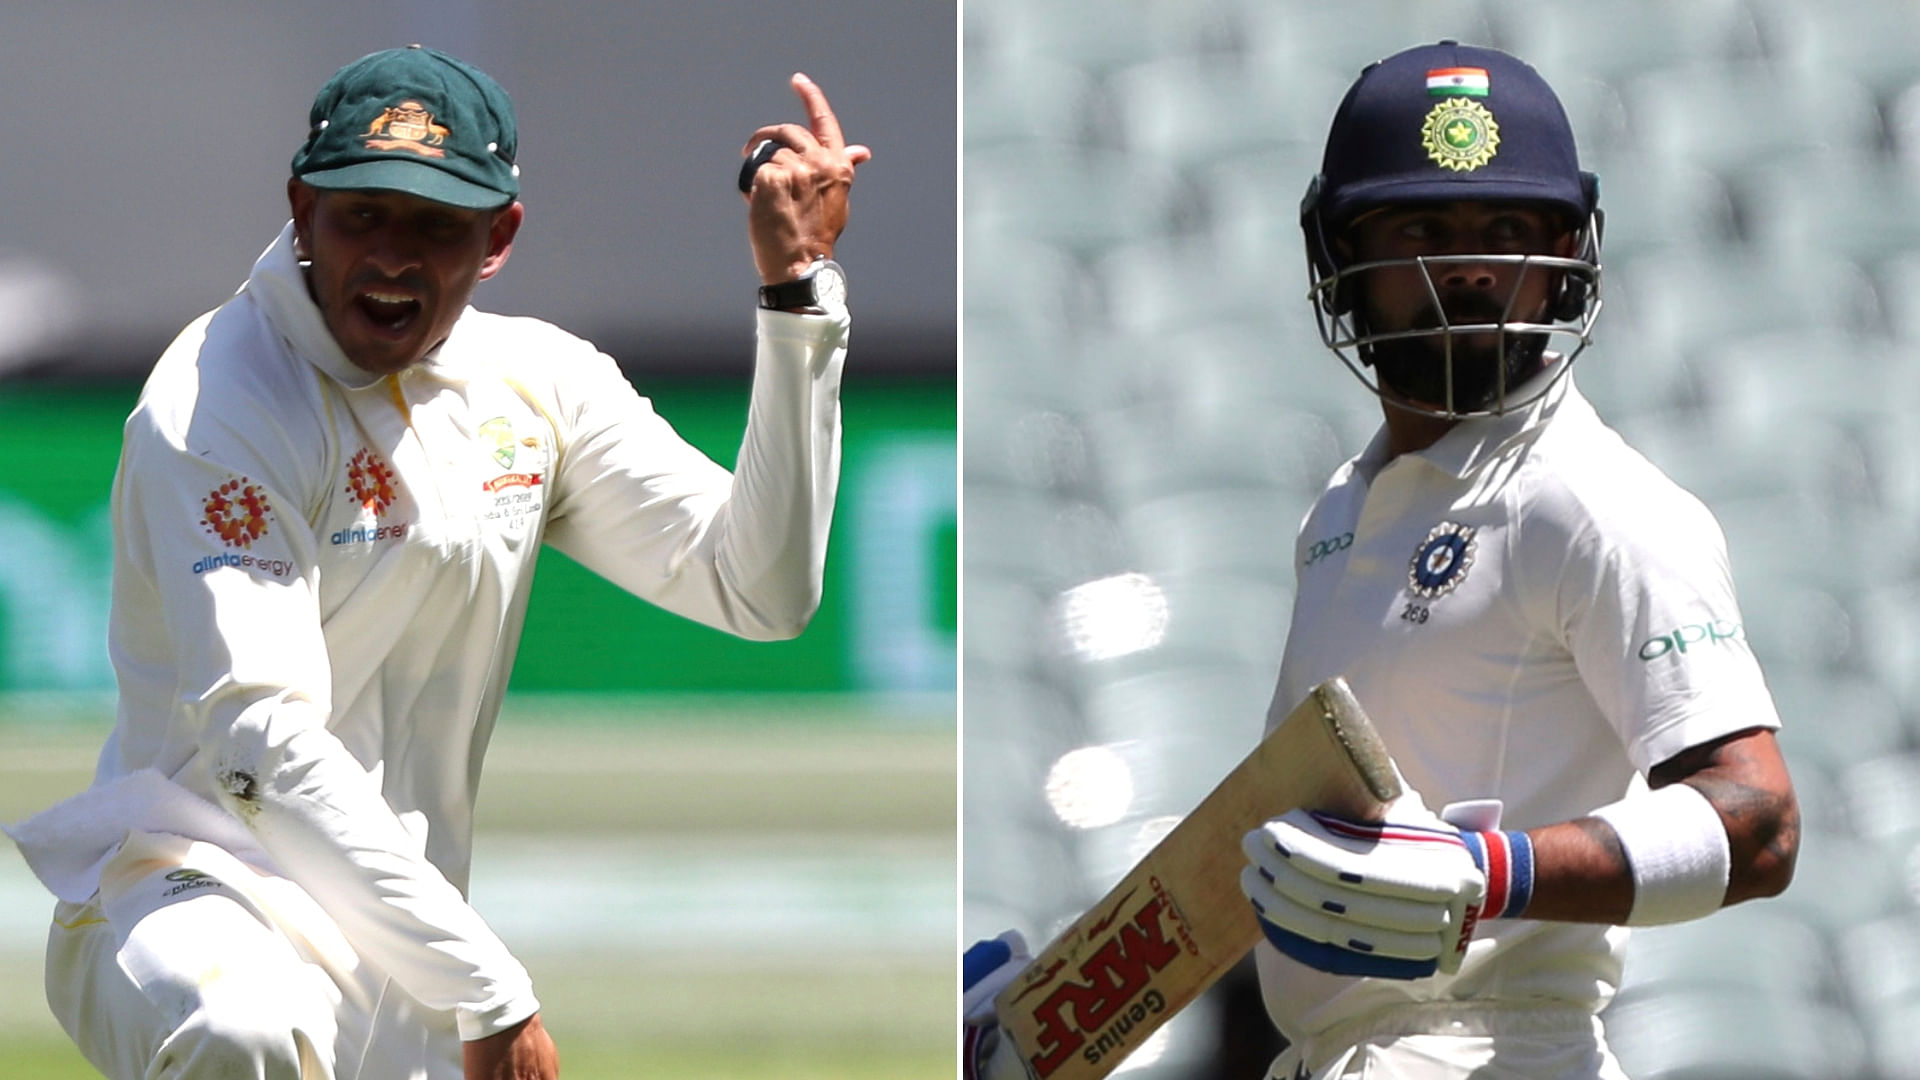 Australia’s Usman Khawaja (left) celebrates after taking a catch to dismiss India’s Virat Kohli (right) during the first cricket Test between Australia and India.